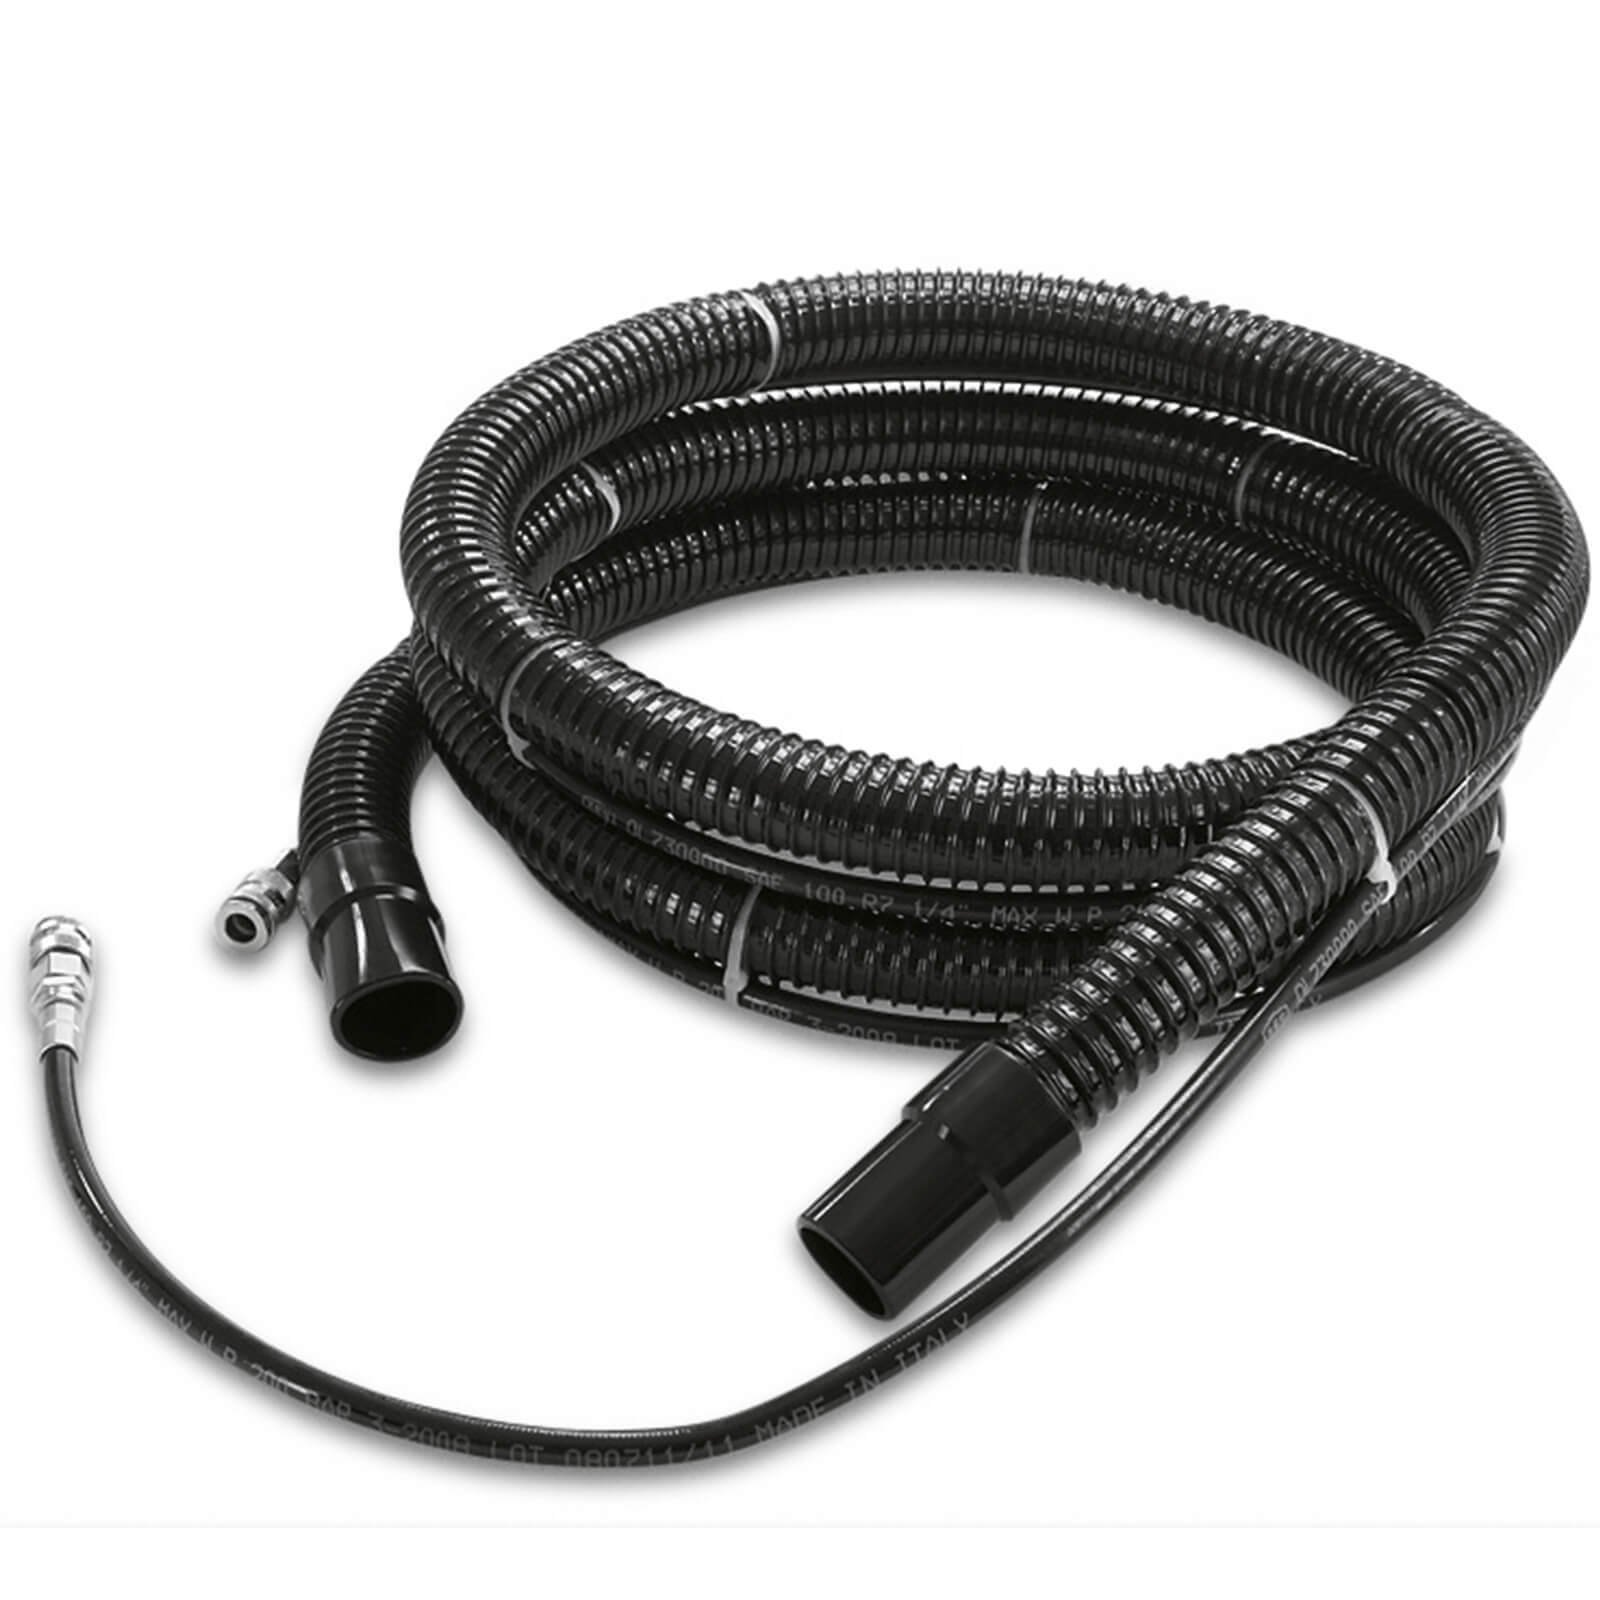 Photo of Karcher Spray Extraction Hose For Brc 30/15 C Carpet Cleaner 4m